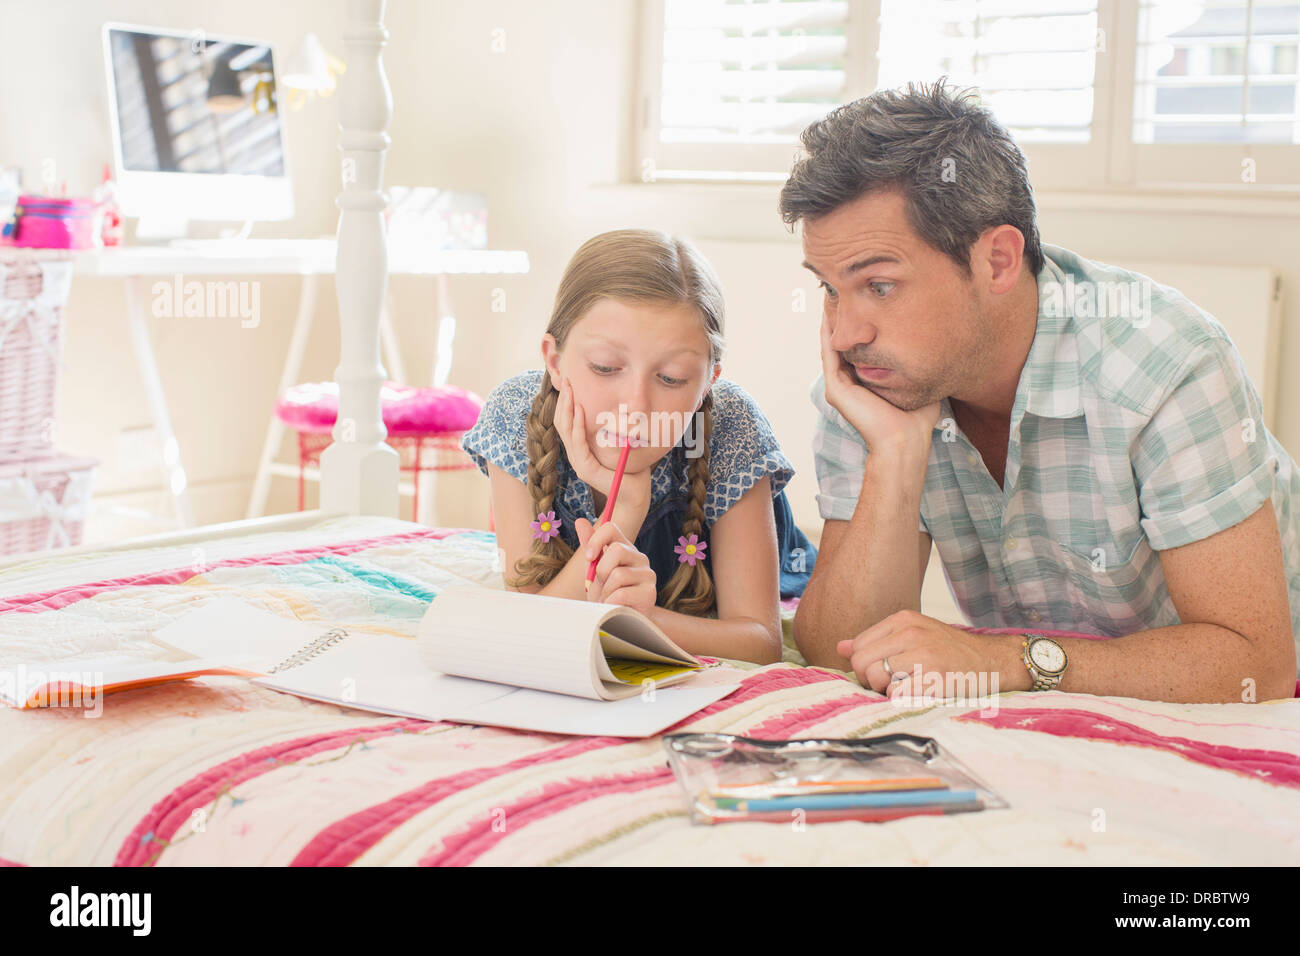 Father helping daughter with homework Stock Photo